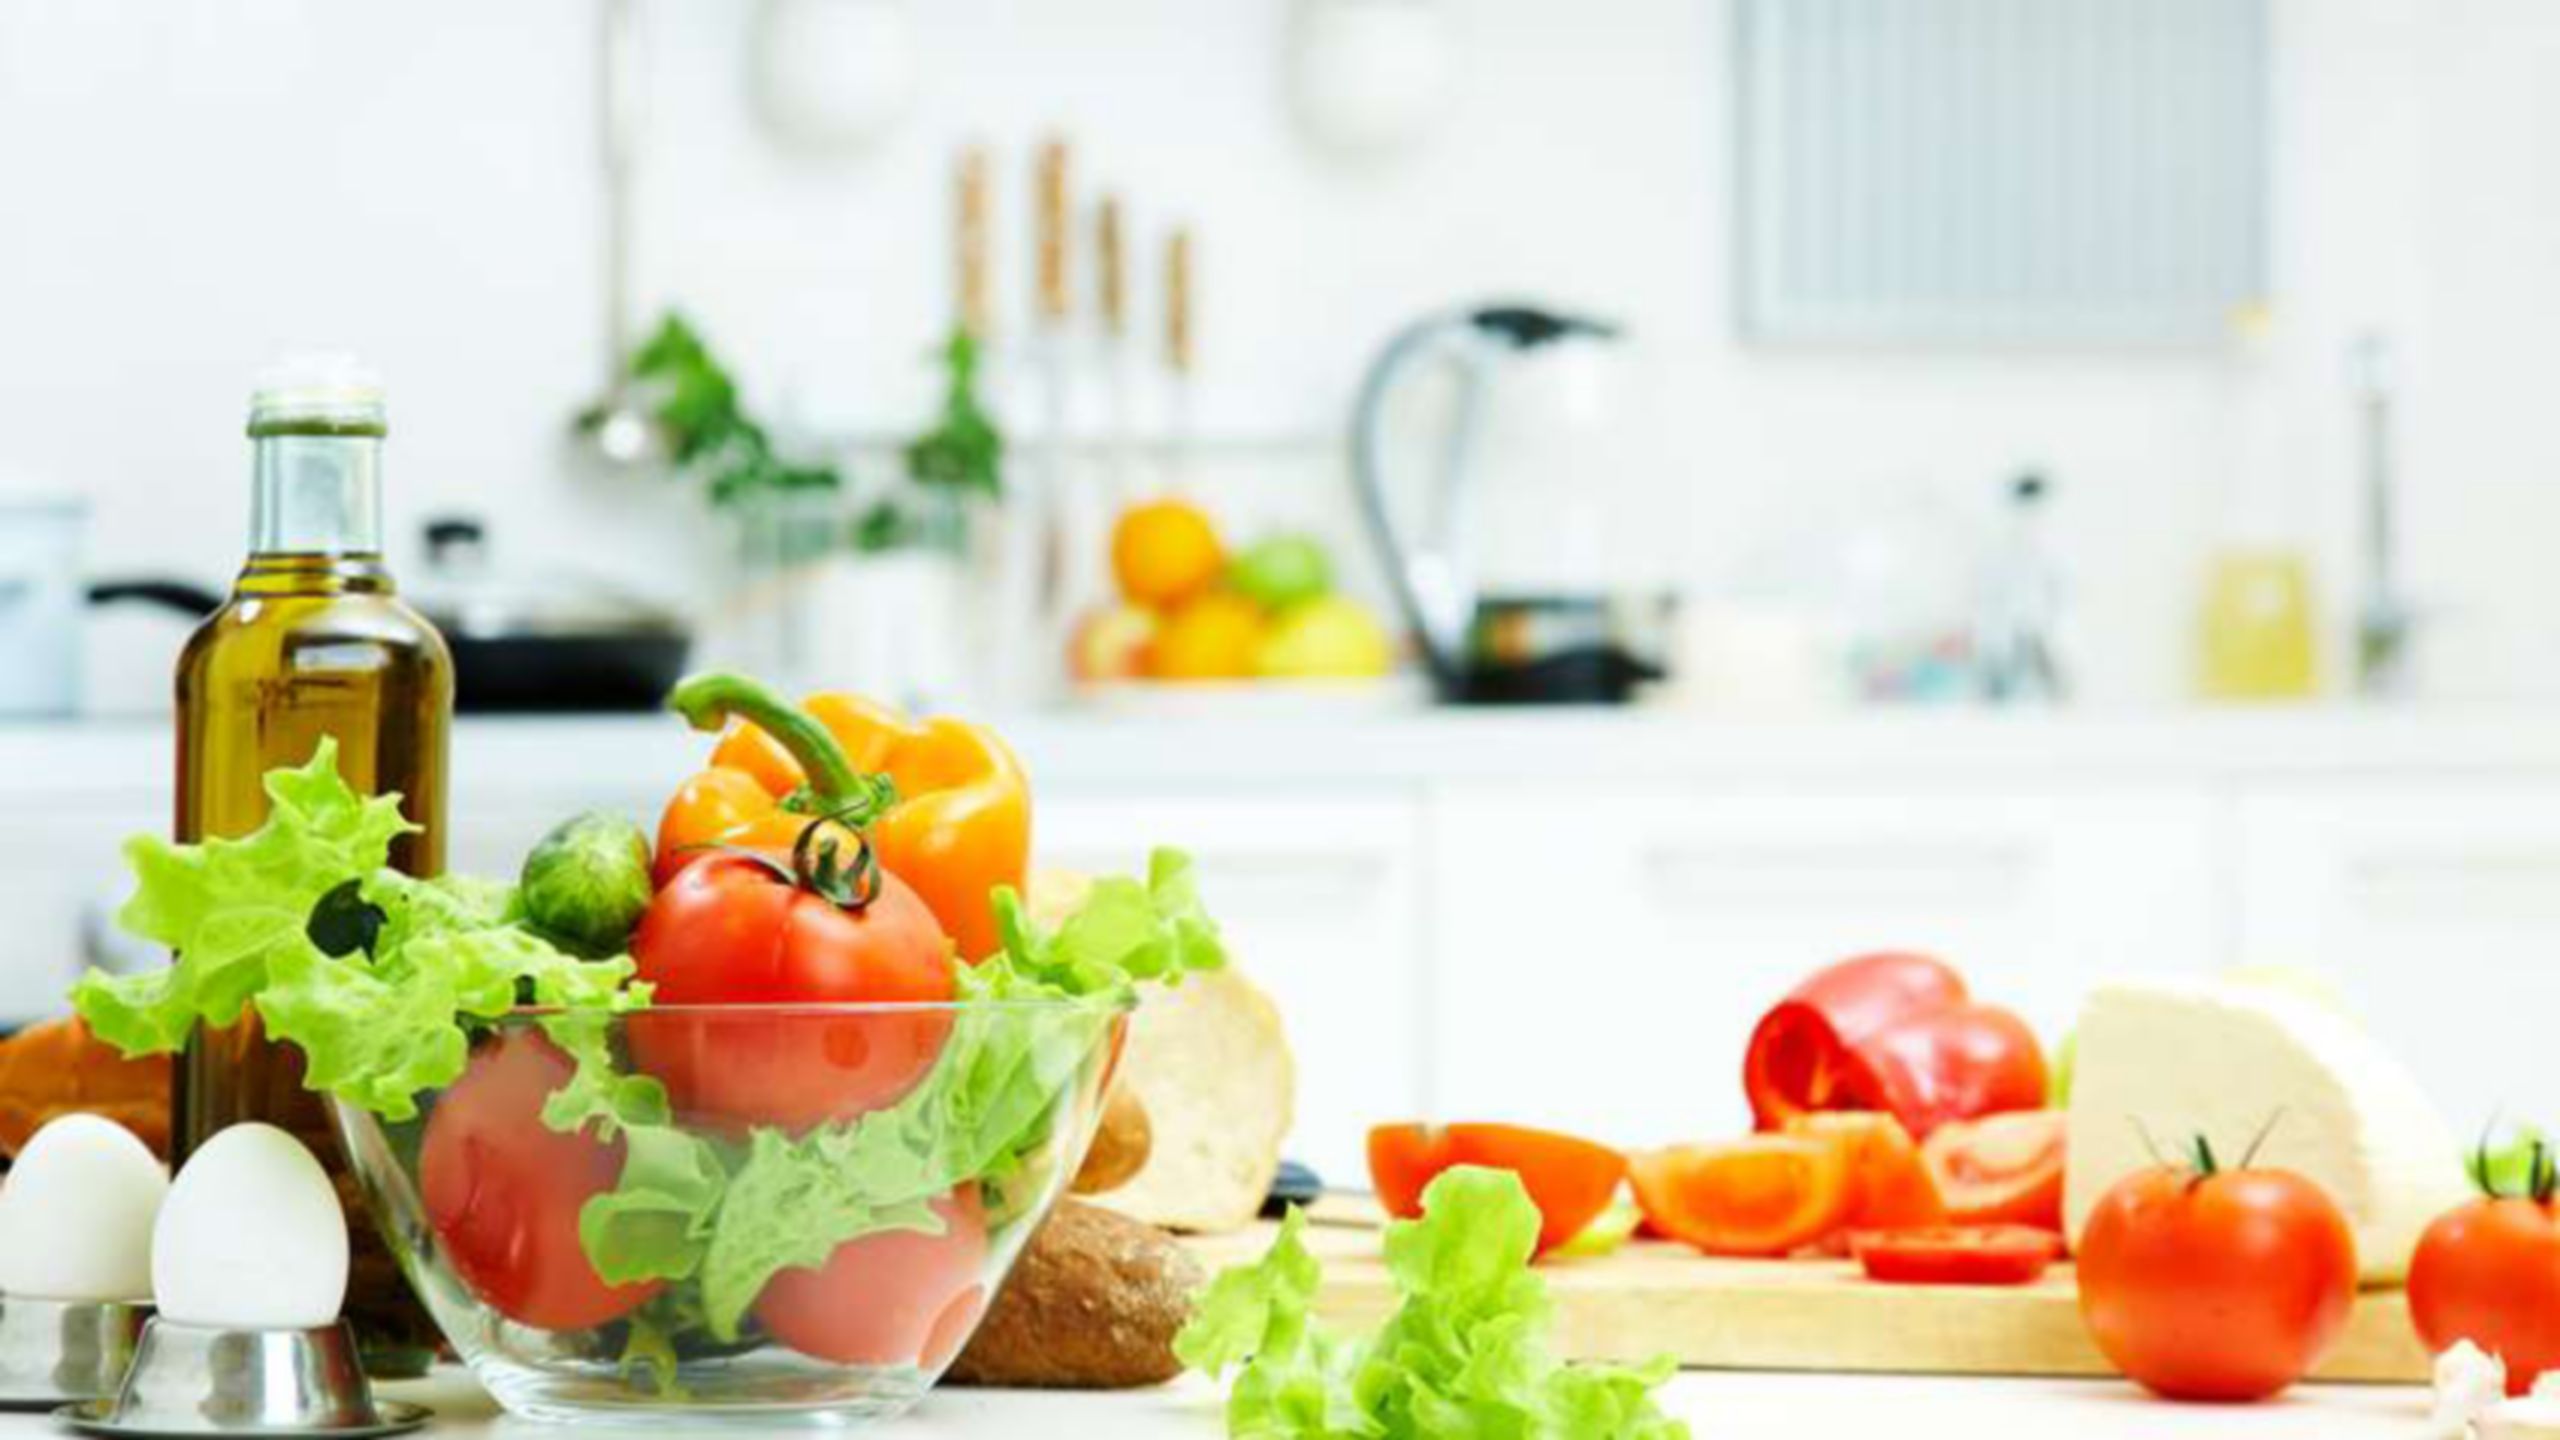 Ingredients to make a salad including tomatoes, lettuce and eggs on a kitchen counter